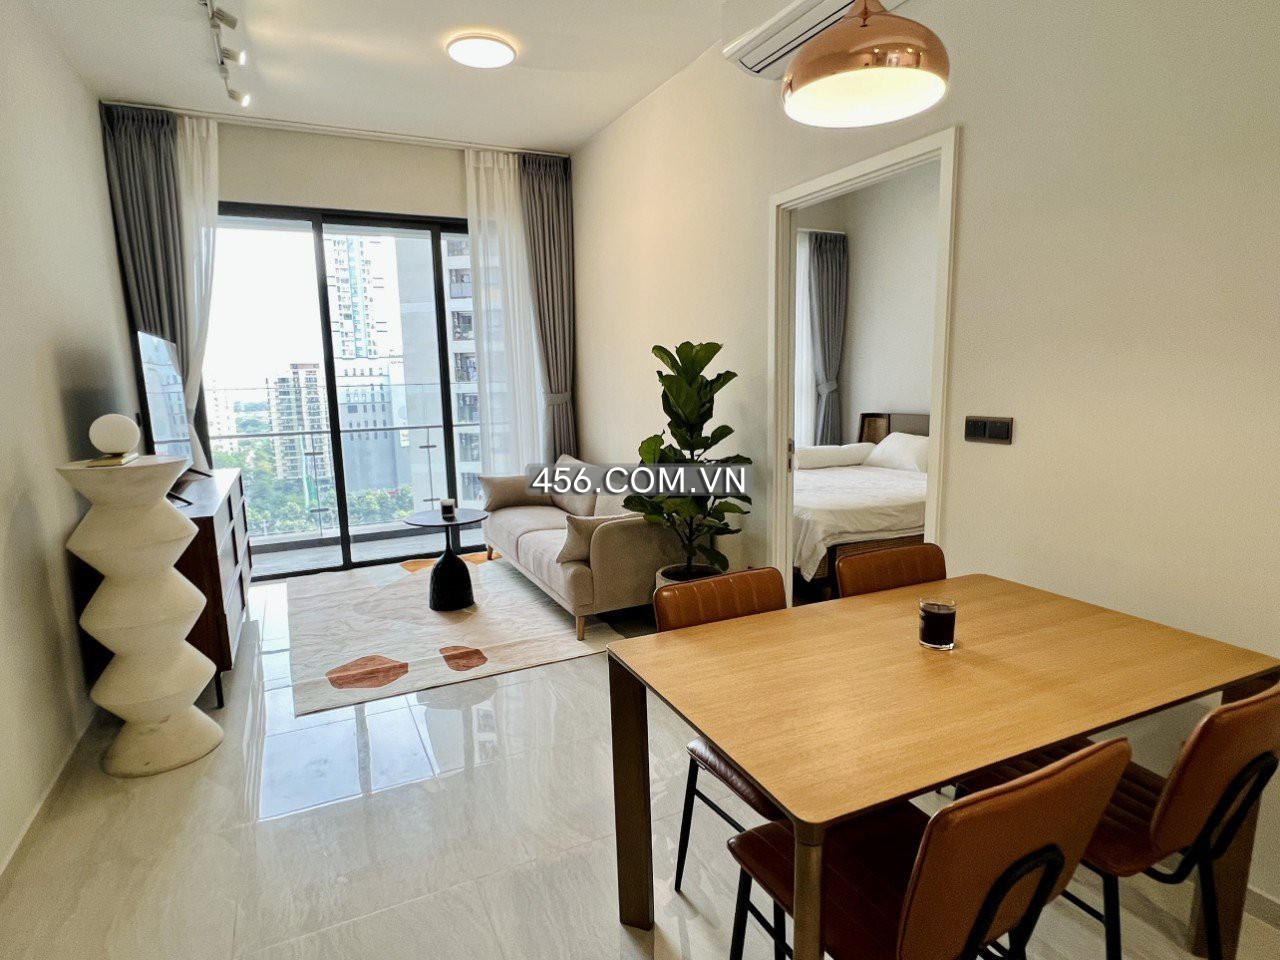 Hinh-1 Bedrooms Q2 Thao Dien Apartment For Rent Nice Furniture